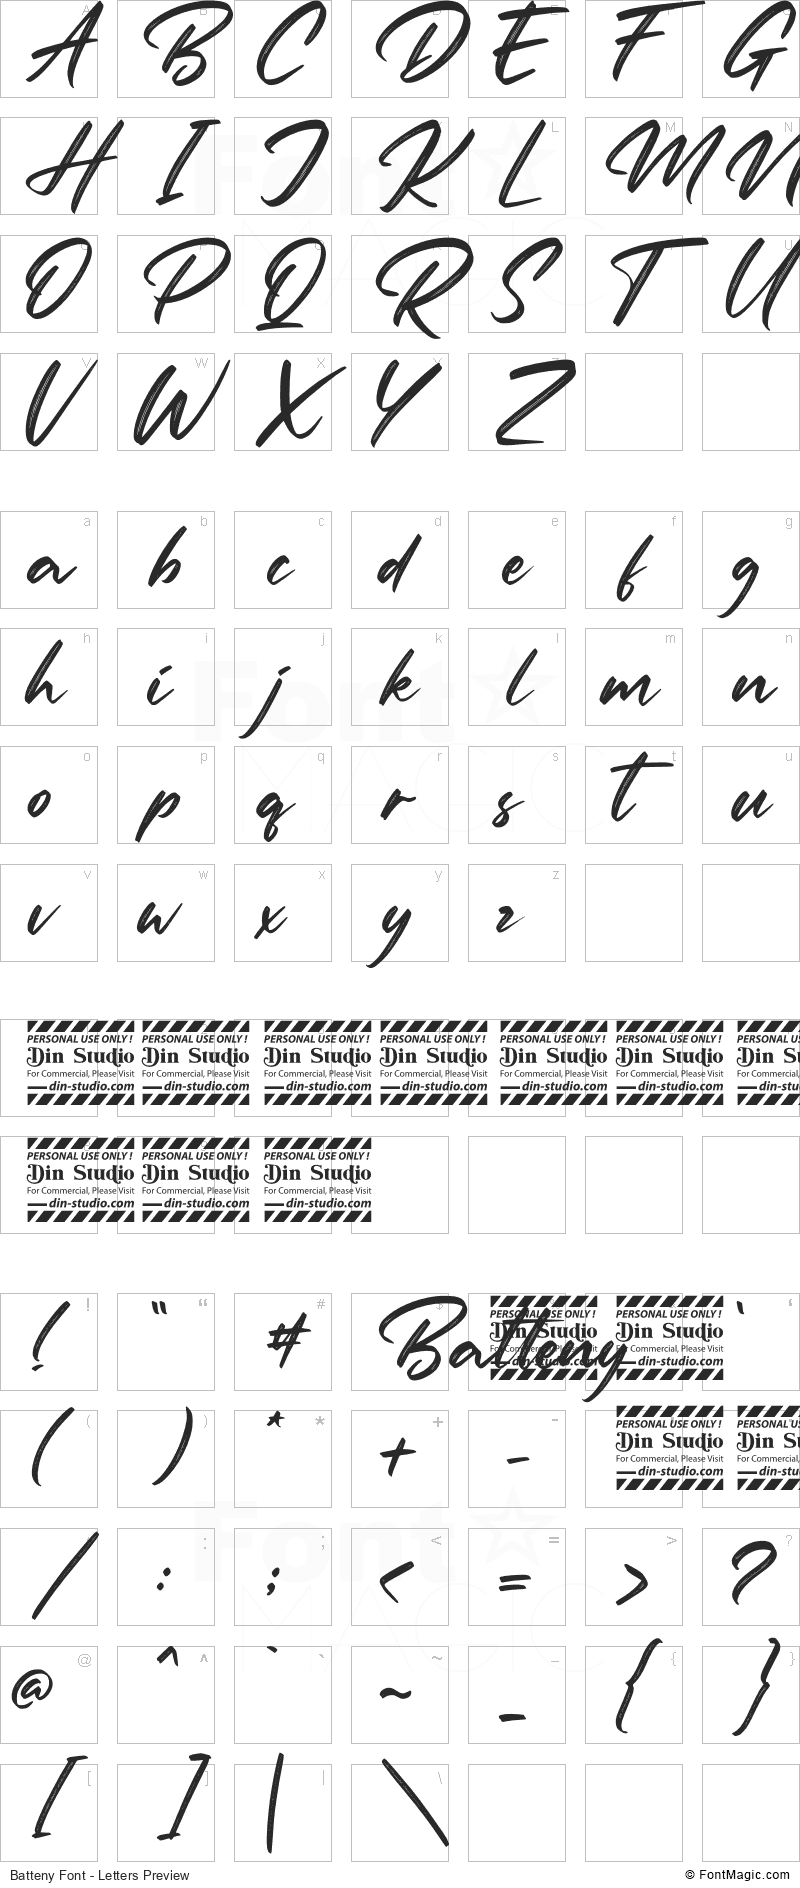 Batteny Font - All Latters Preview Chart